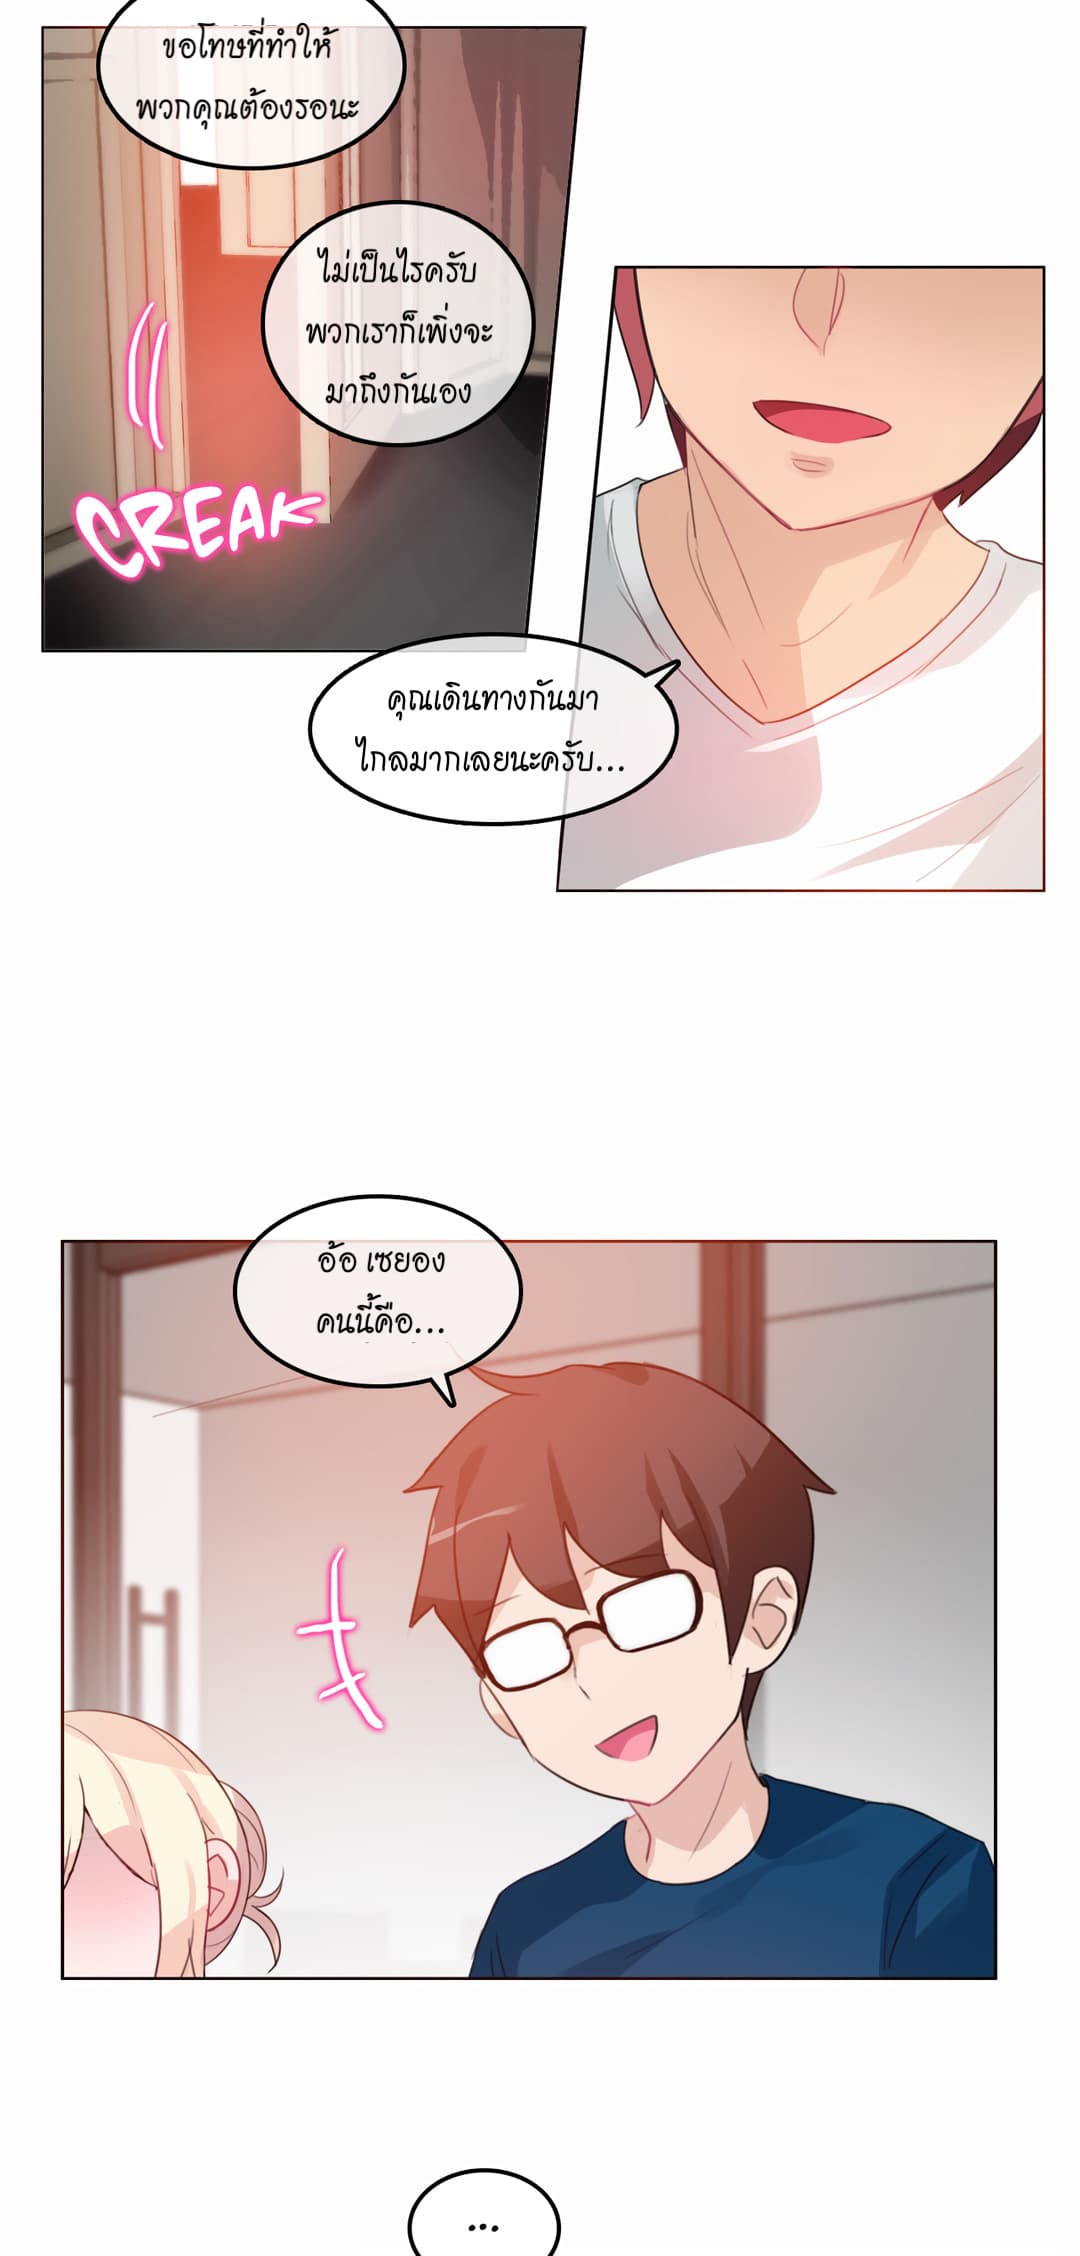 A Pervert’s Daily Life 19 (21)